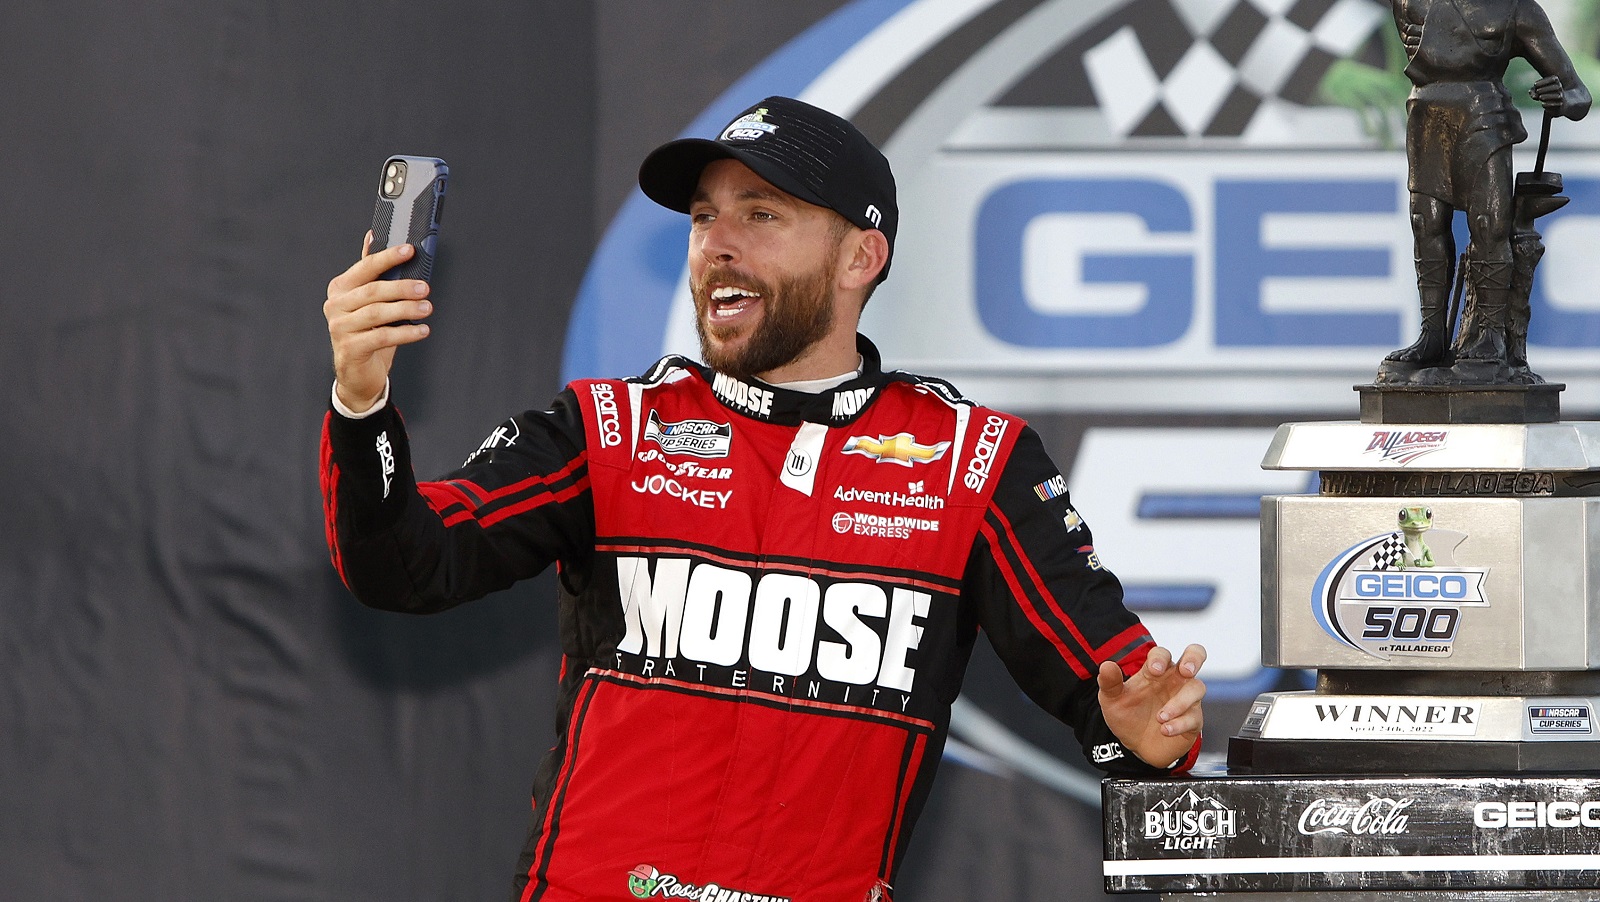 Ross Chastain, driver of the No. 1 Chevrolet, takes a selfie on Victory Lane after winning the NASCAR Cup Series GEICO 500 at Talladega Superspeedway on April 24, 2022. | Sean Gardner/Getty Images